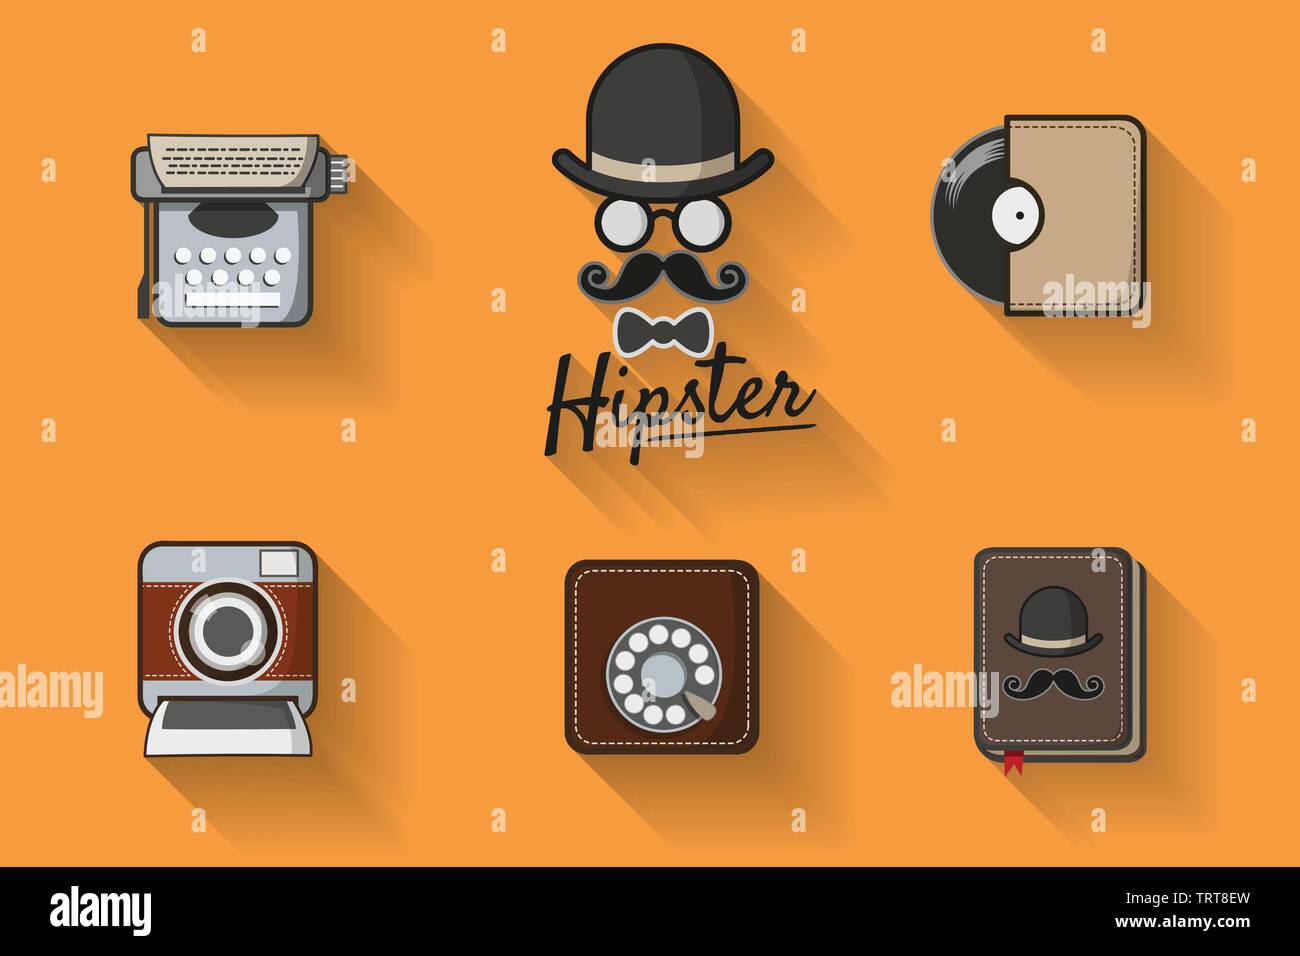 Hipster with mustache. Hipster icon vector theme set with vintage analog dial phone, record,  instant camera and typewriter. Vintage style for hipster Stock Vector